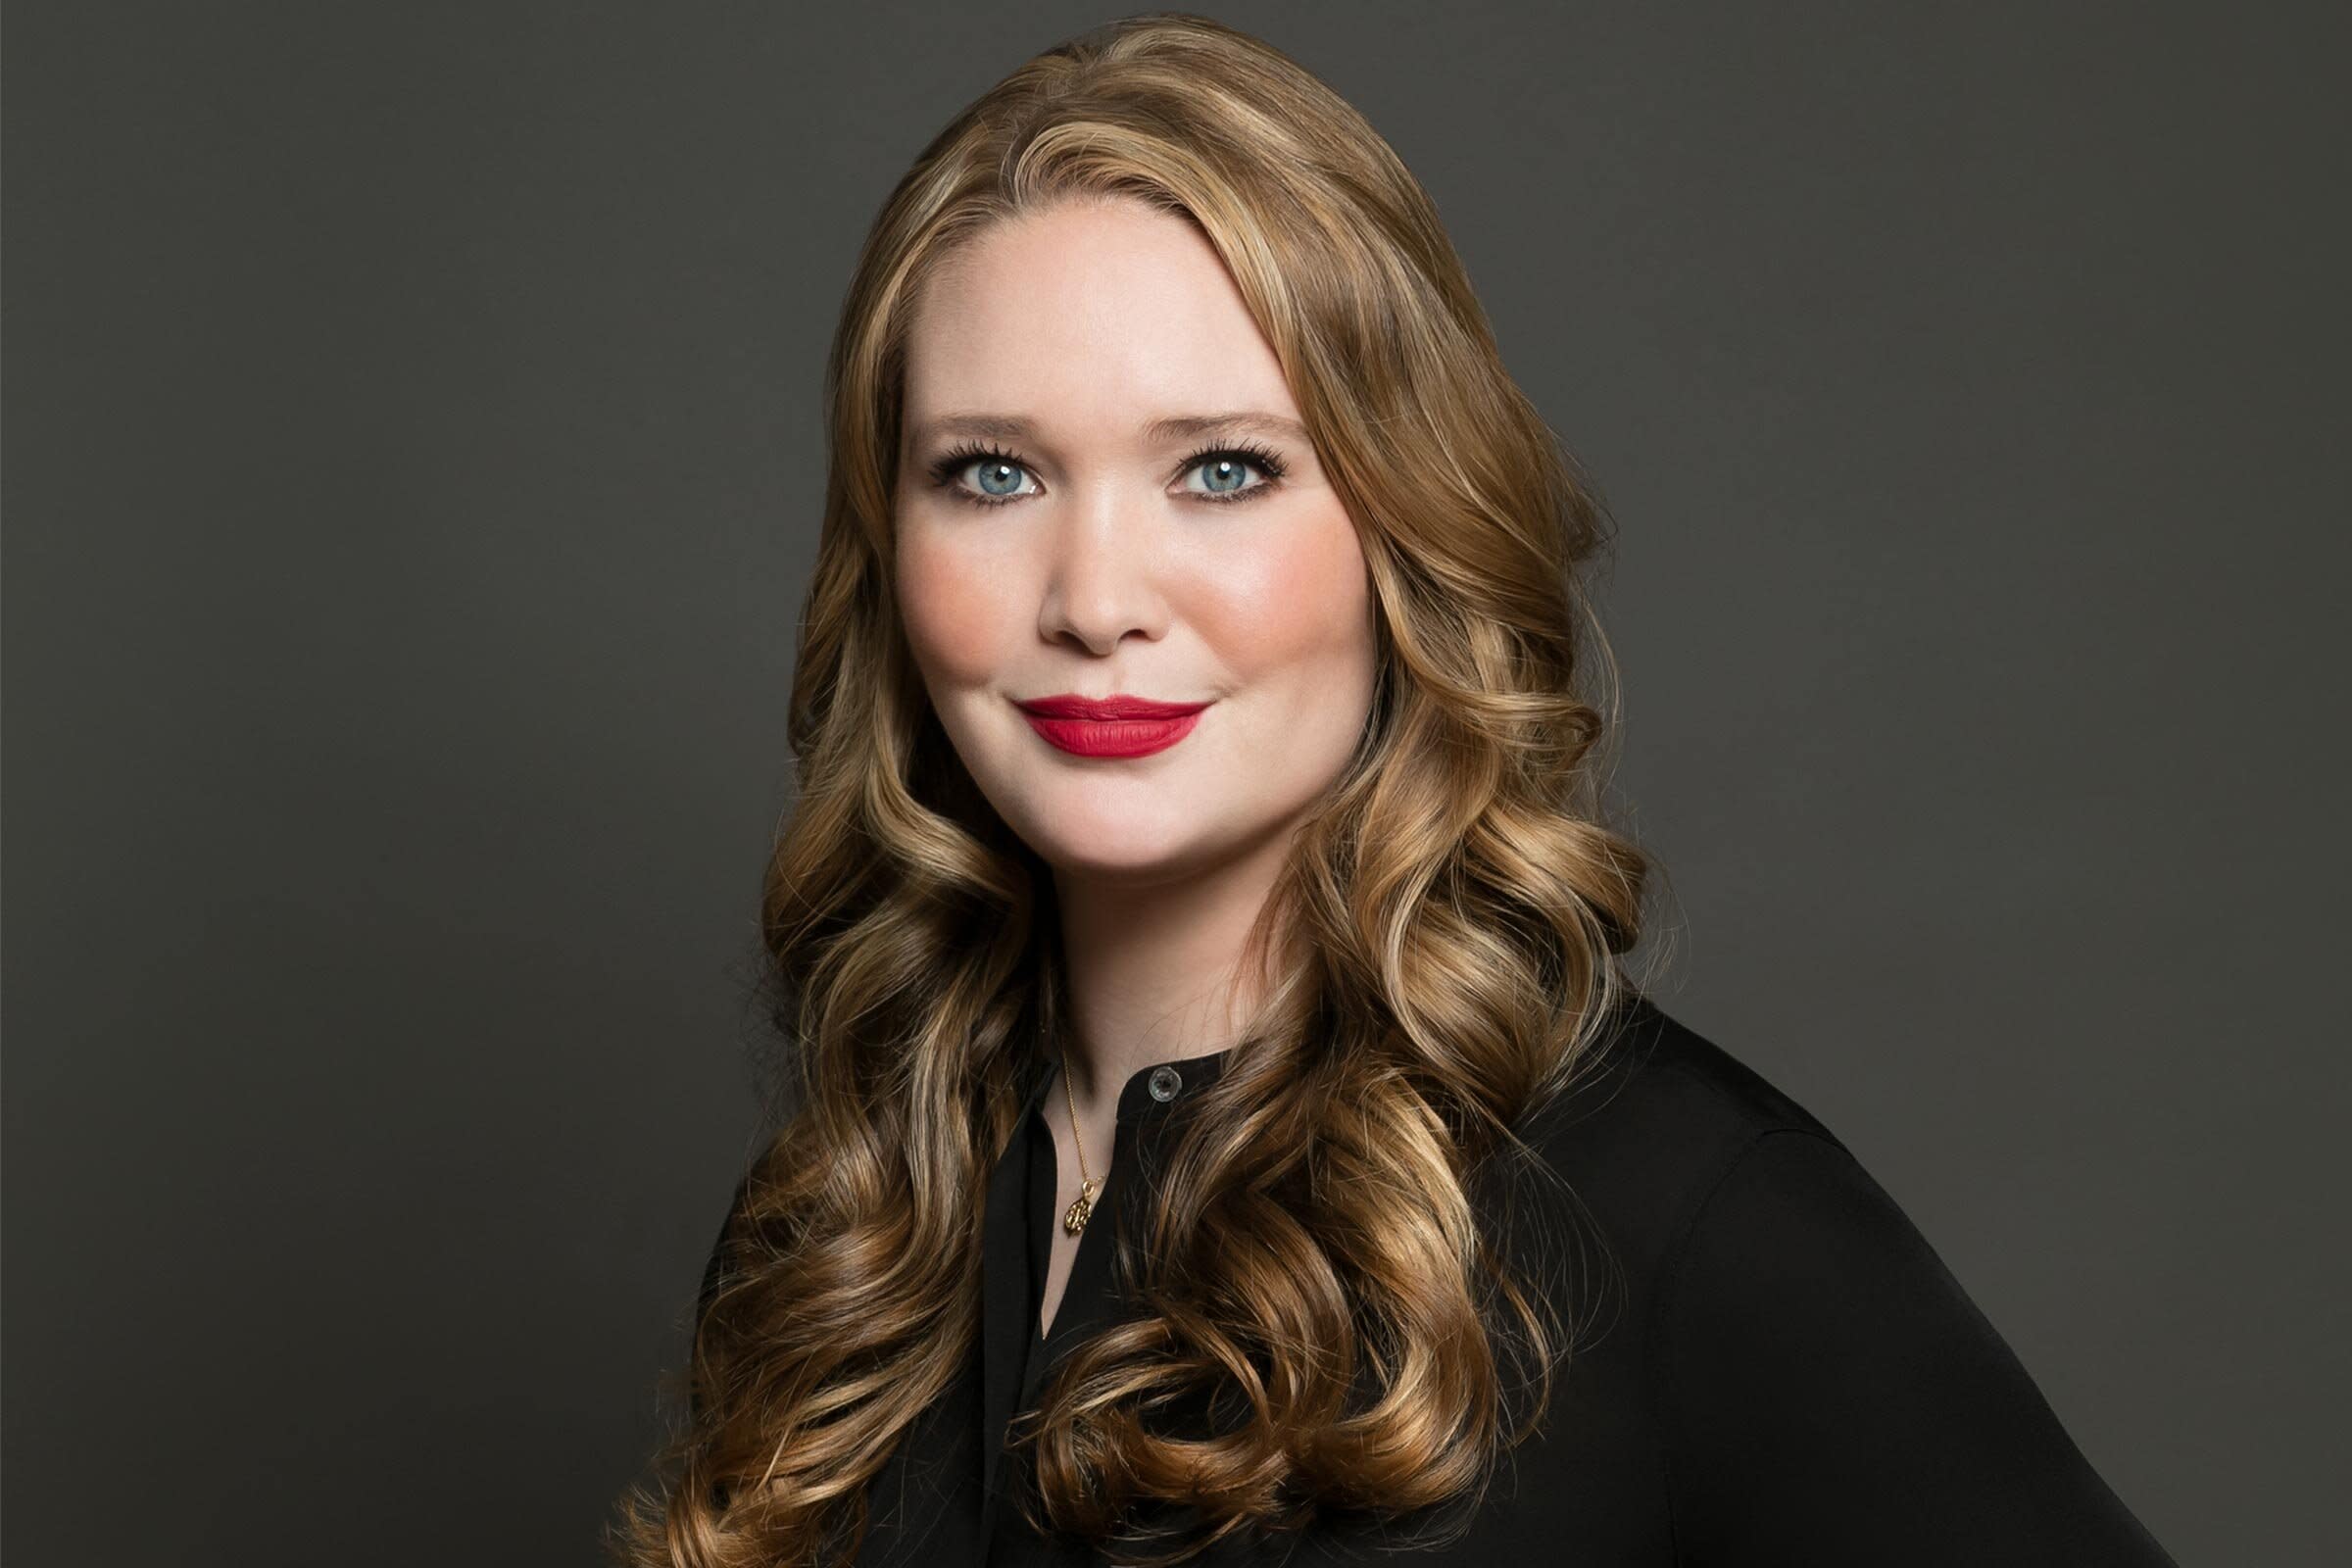 Exclusive Sarah J. Maas unveils new covers for A Court of Thorns and Roses